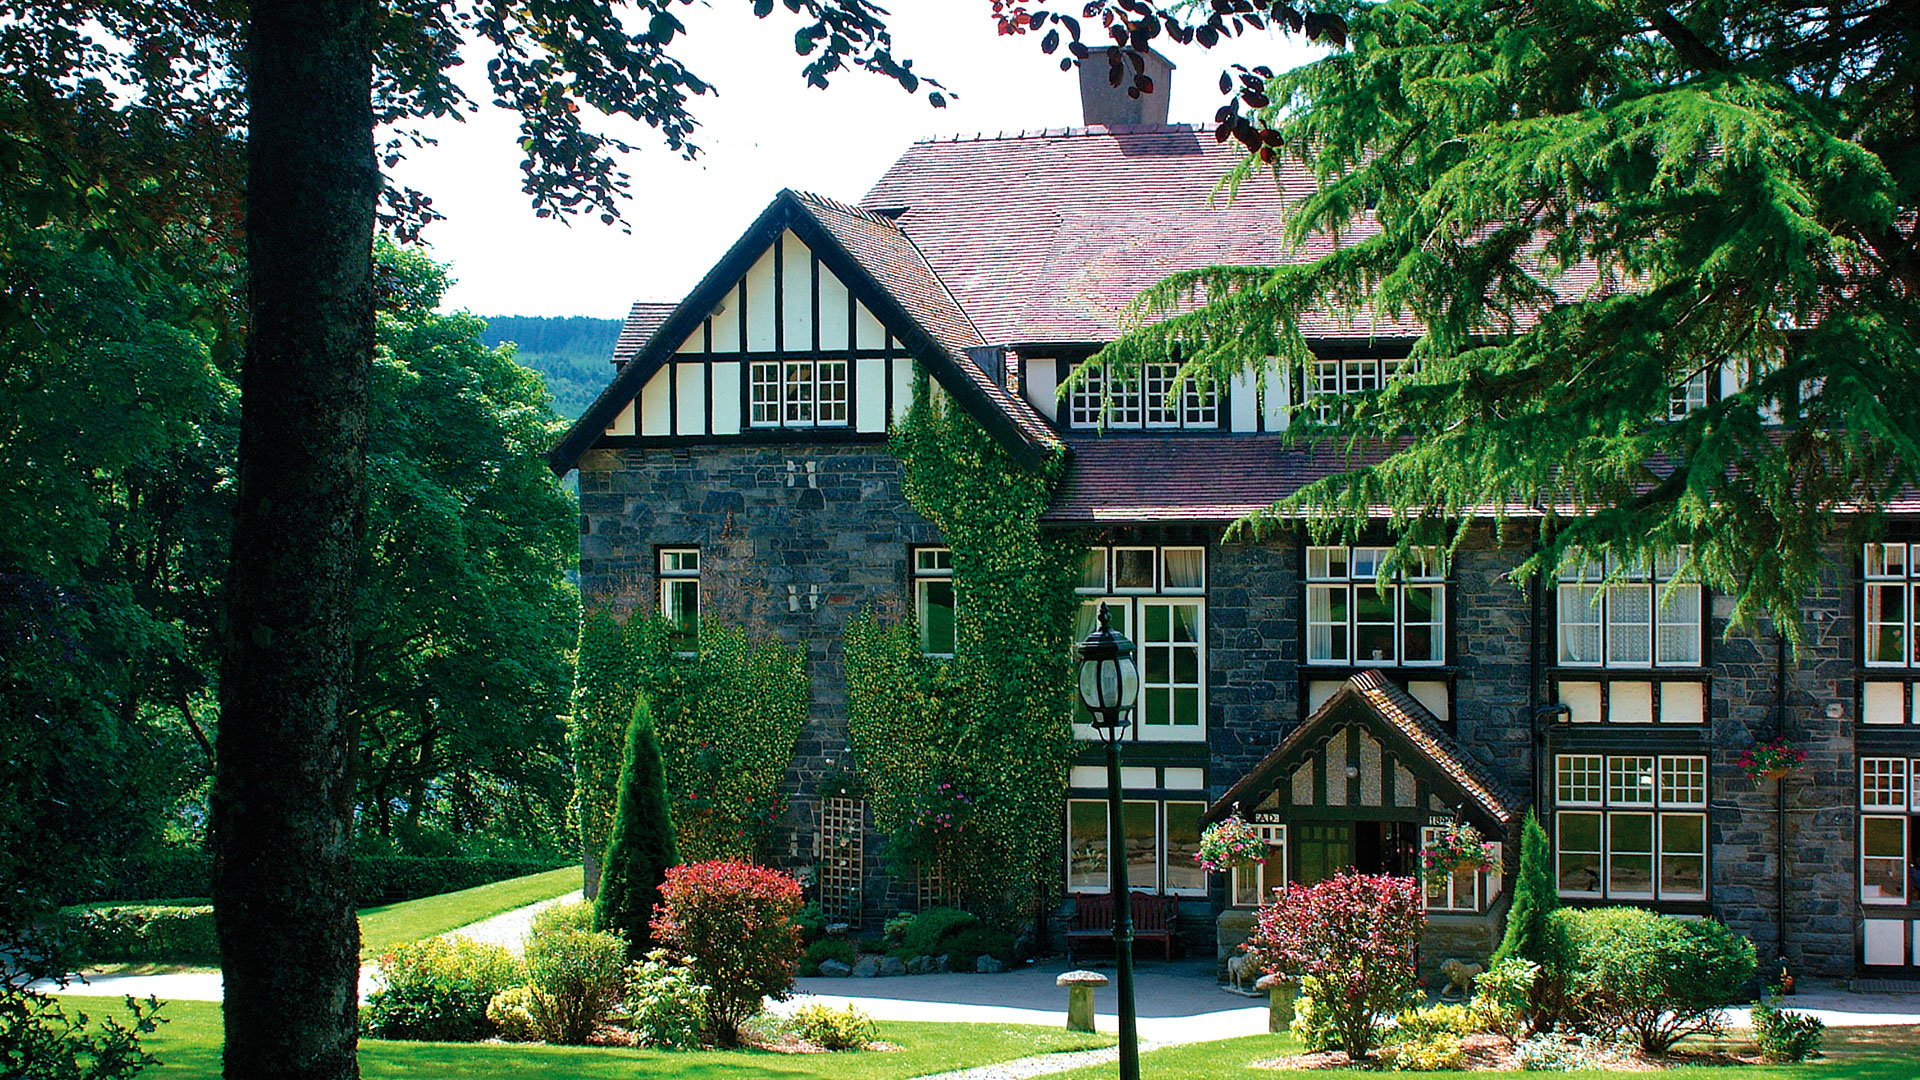 The ivy clad Manor House - Lake Vyrnwy Hotel & Spa, Snowdonia